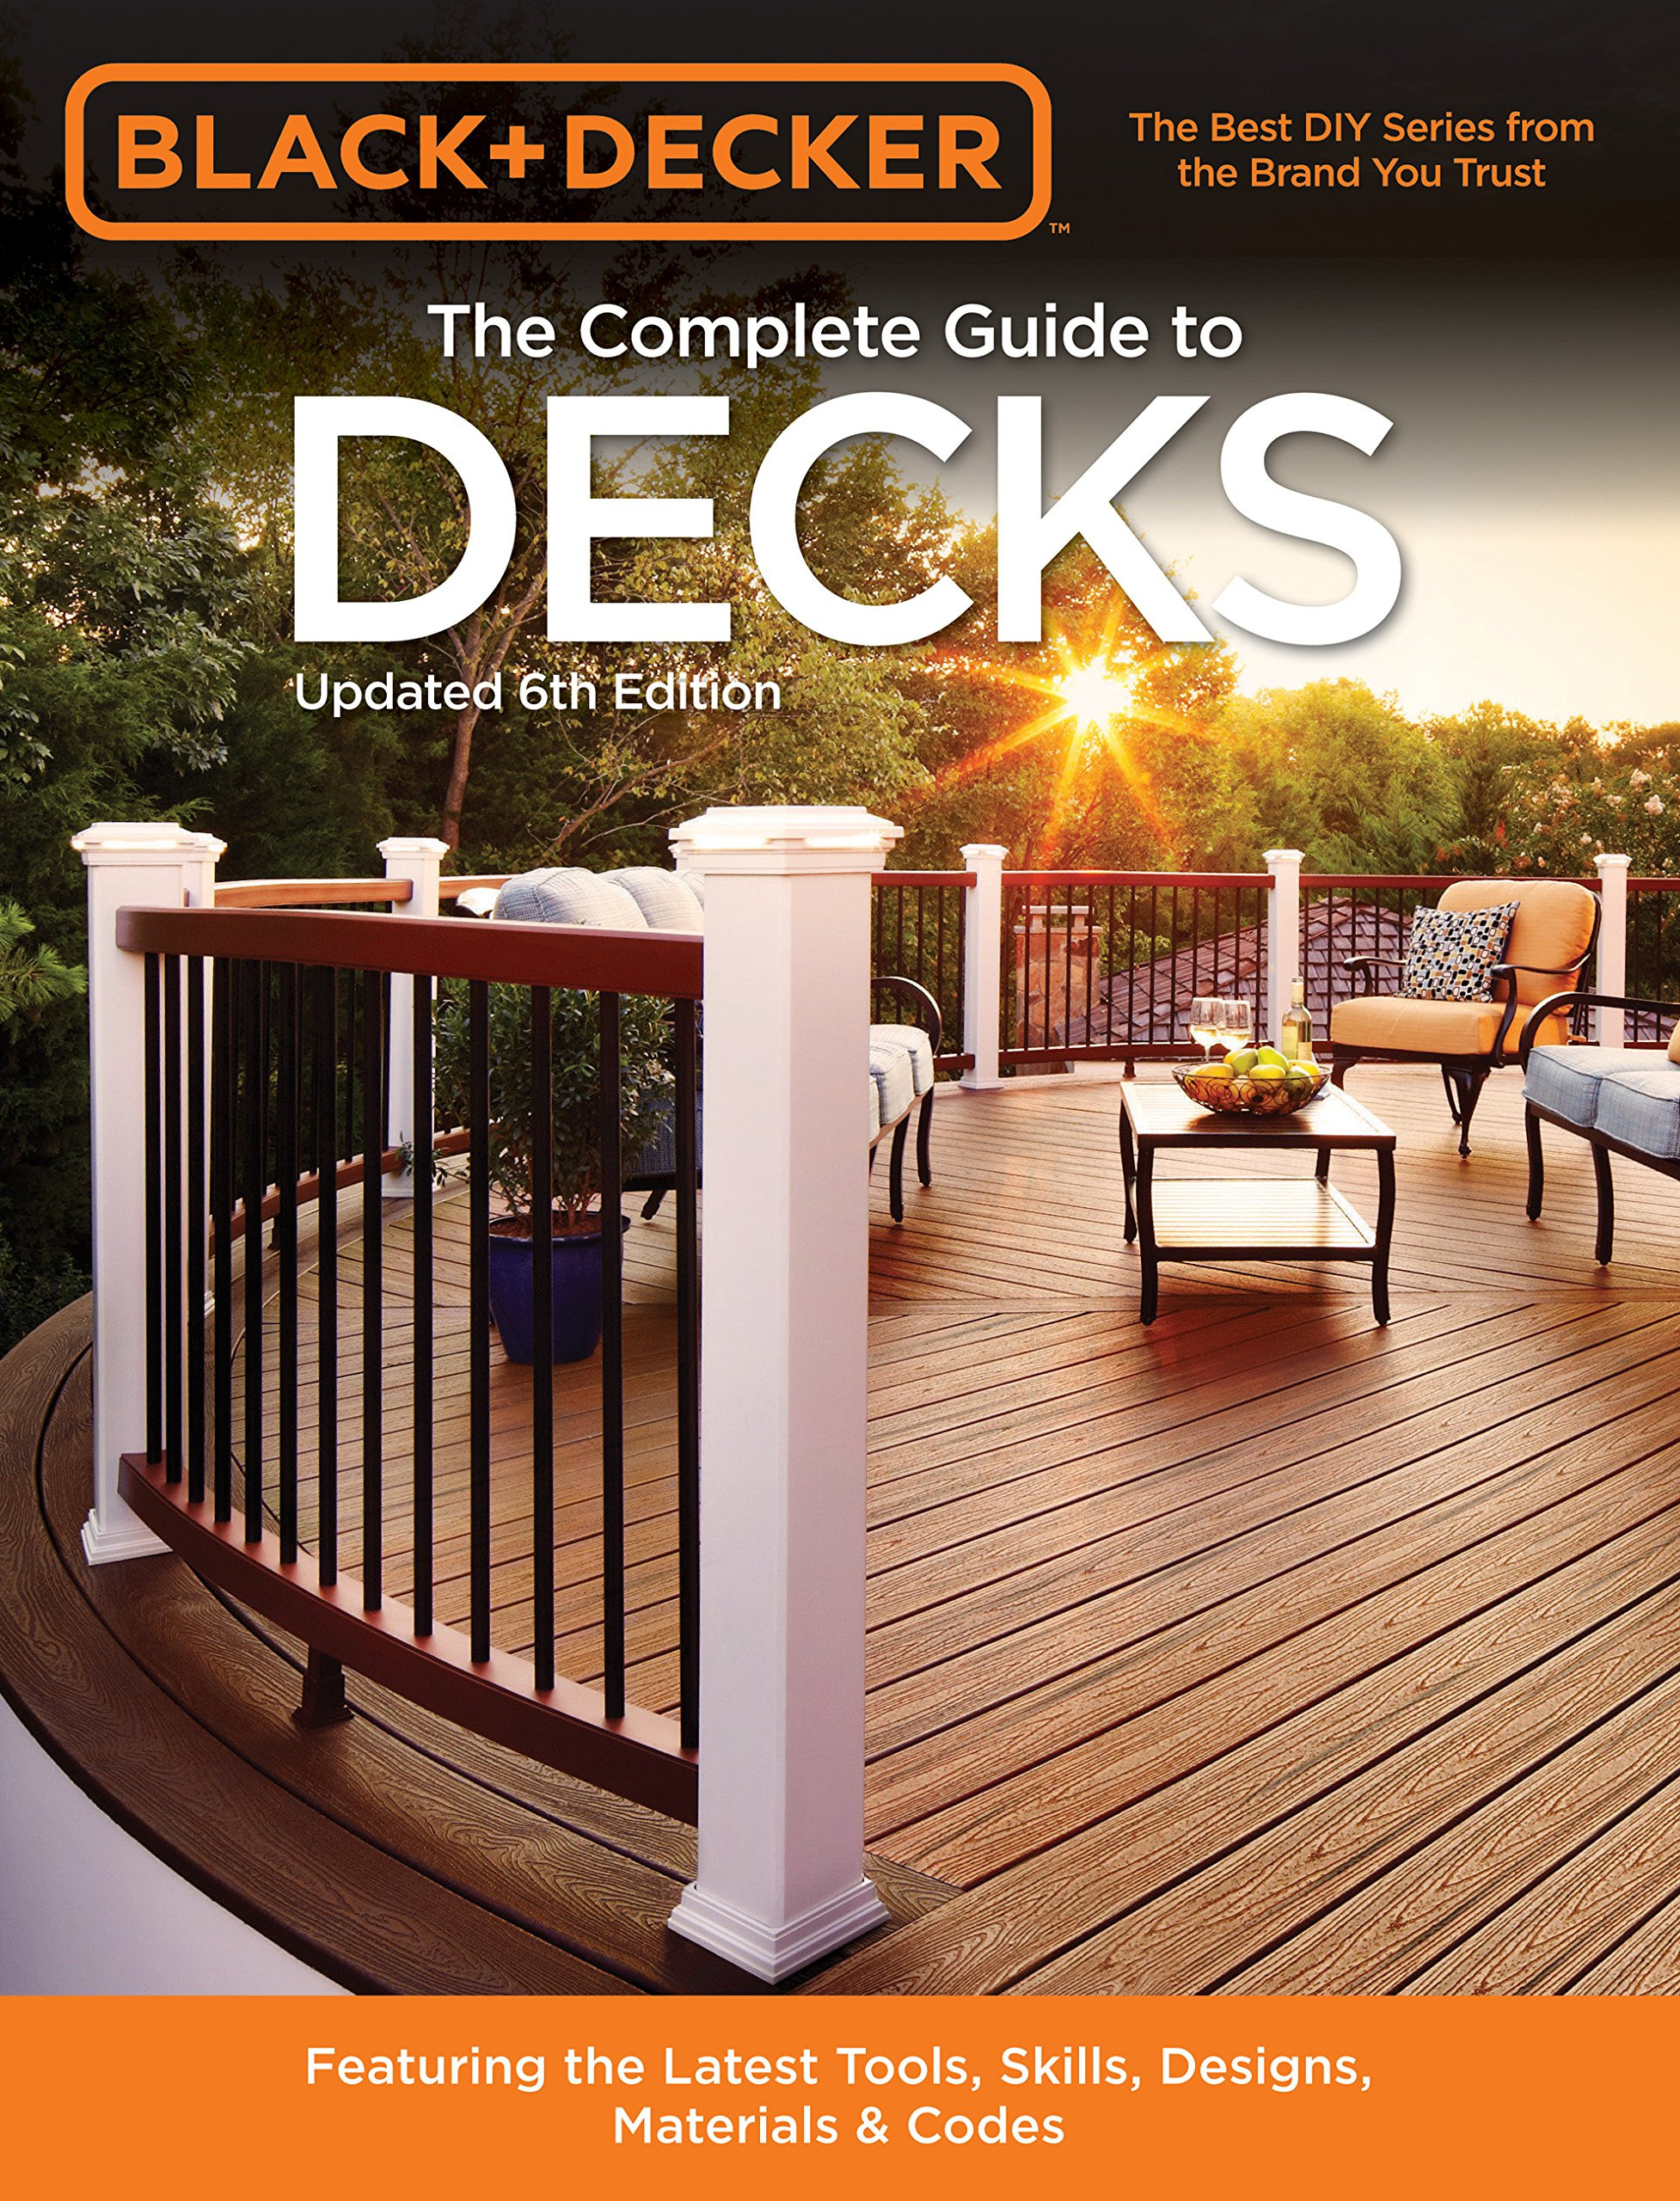 27 Fabulous Bruce Hardwood Flooring Installation Video 2024 free download bruce hardwood flooring installation video of black decker the complete guide to decks 6th edition featuring inside black decker the complete guide to decks 6th edition featuring the latest 